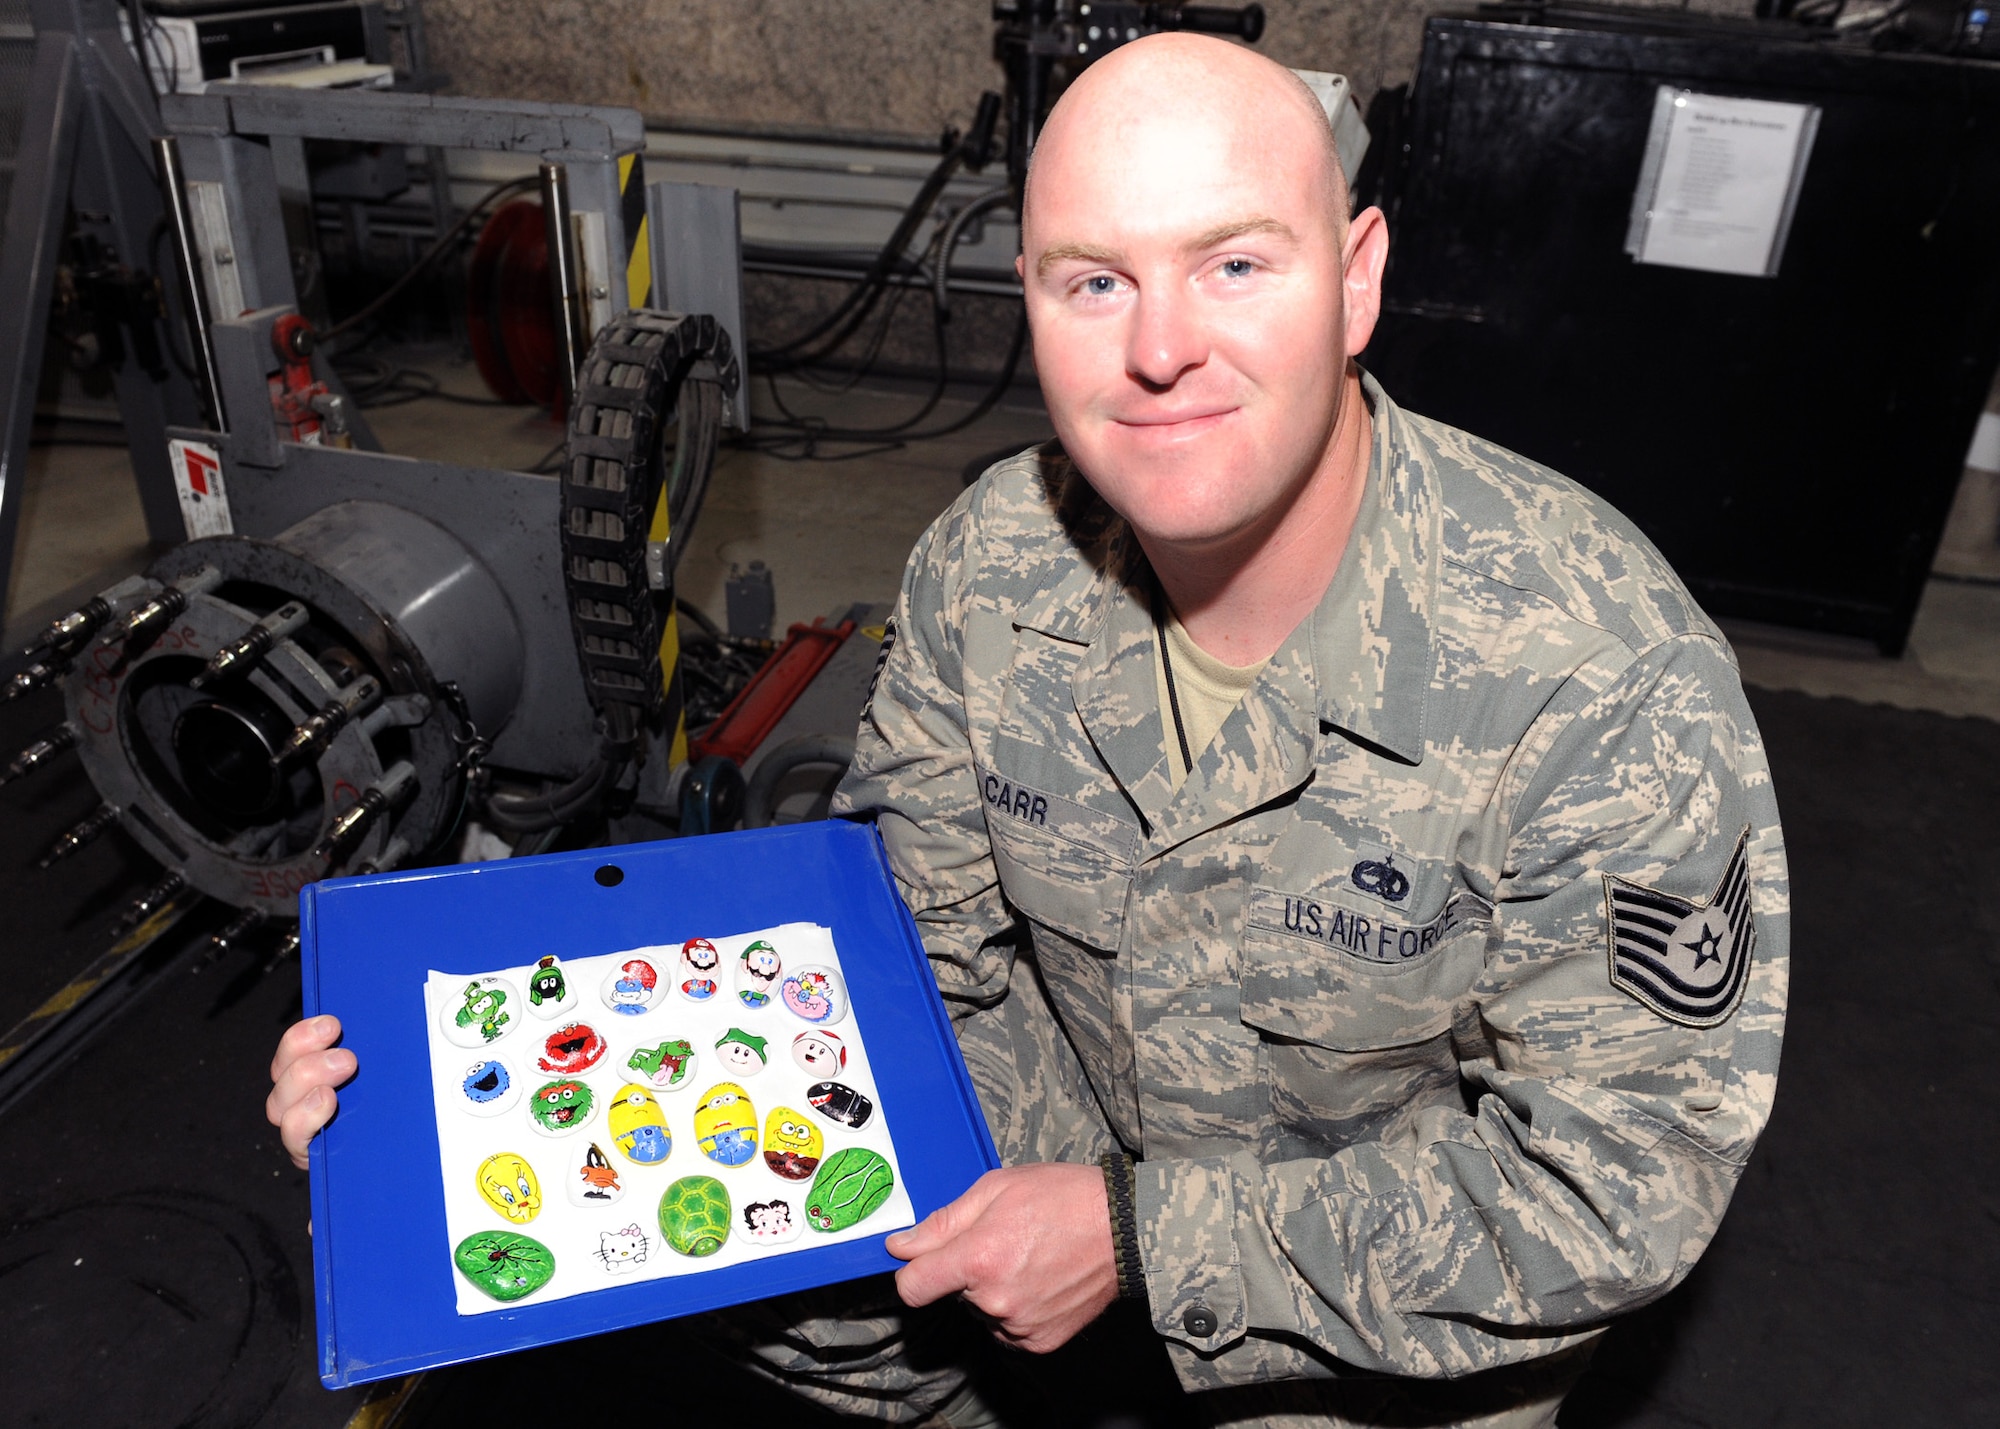 SOUTHWEST ASIA – Tech. Sgt. Christopher Carr, an aircraft battle damage repair technician with the 379th Expeditionary Maintenance Squadron, started an art collection by painting rocks found on the desert floor and leaving them for service members to improve morale. “You could pick it up and take it with you, or maybe even lay it somewhere else for someone else to kick over and find,” Carr said. “Maybe it will inspire others to do their own artwork, or leave an inspirational message if you’re not an artist.” Carr is deployed from Robins Air Force Base, Ga., and is a native of Birmingham, Ala. (U.S. Air Force photo/Senior Airman Joel Mease)